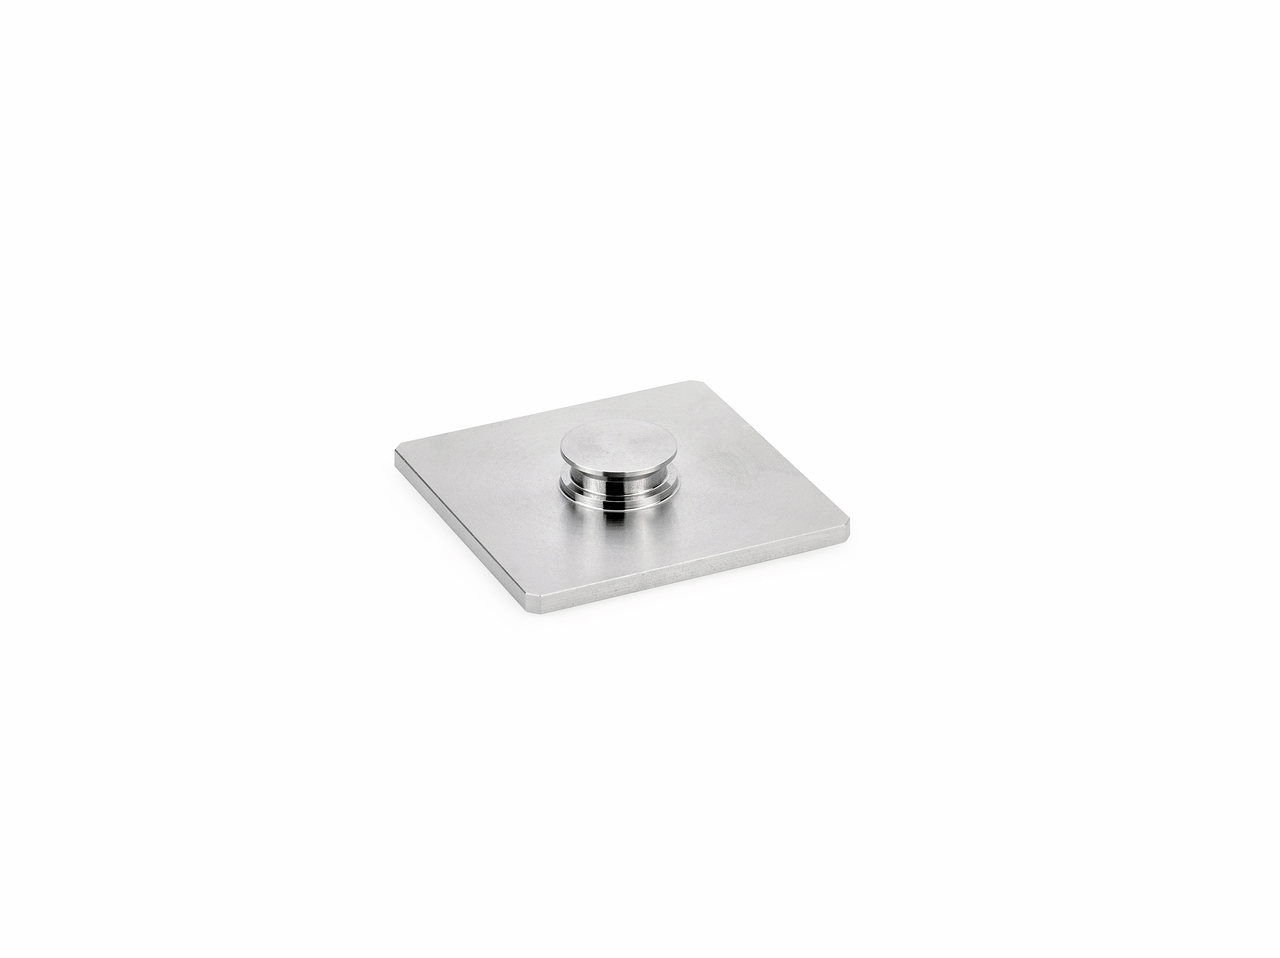  Glass adapter disk, stainless-steel